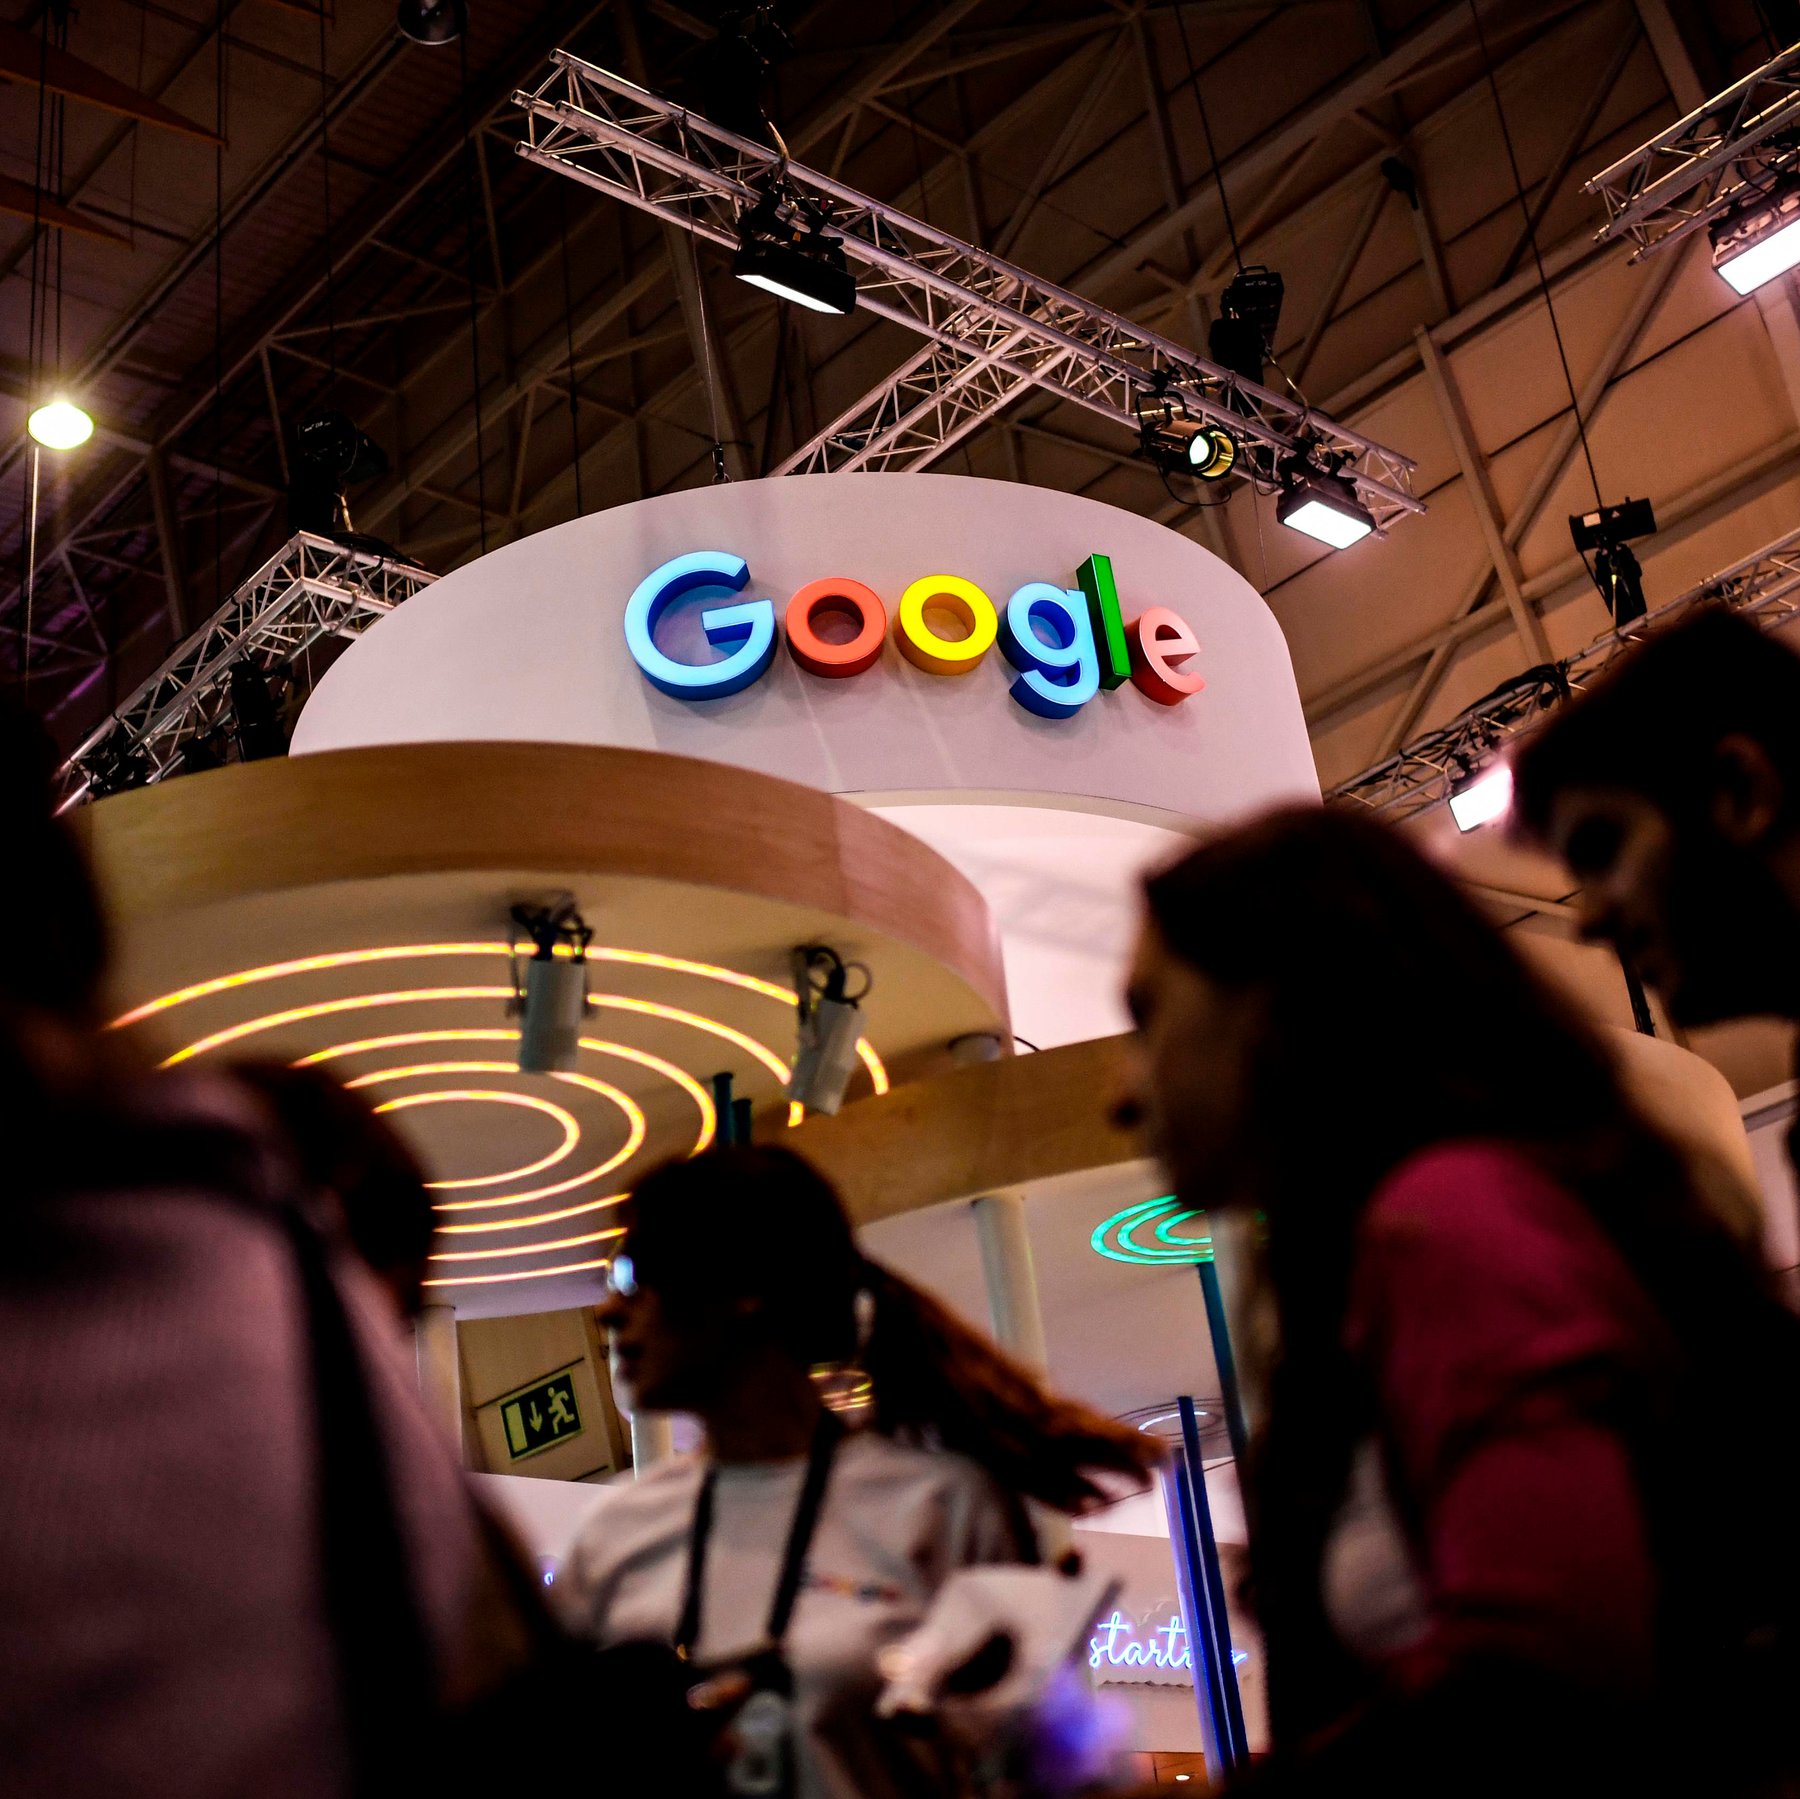 Google’s Black Founders Fund to empower female entrepreneurs in Africa